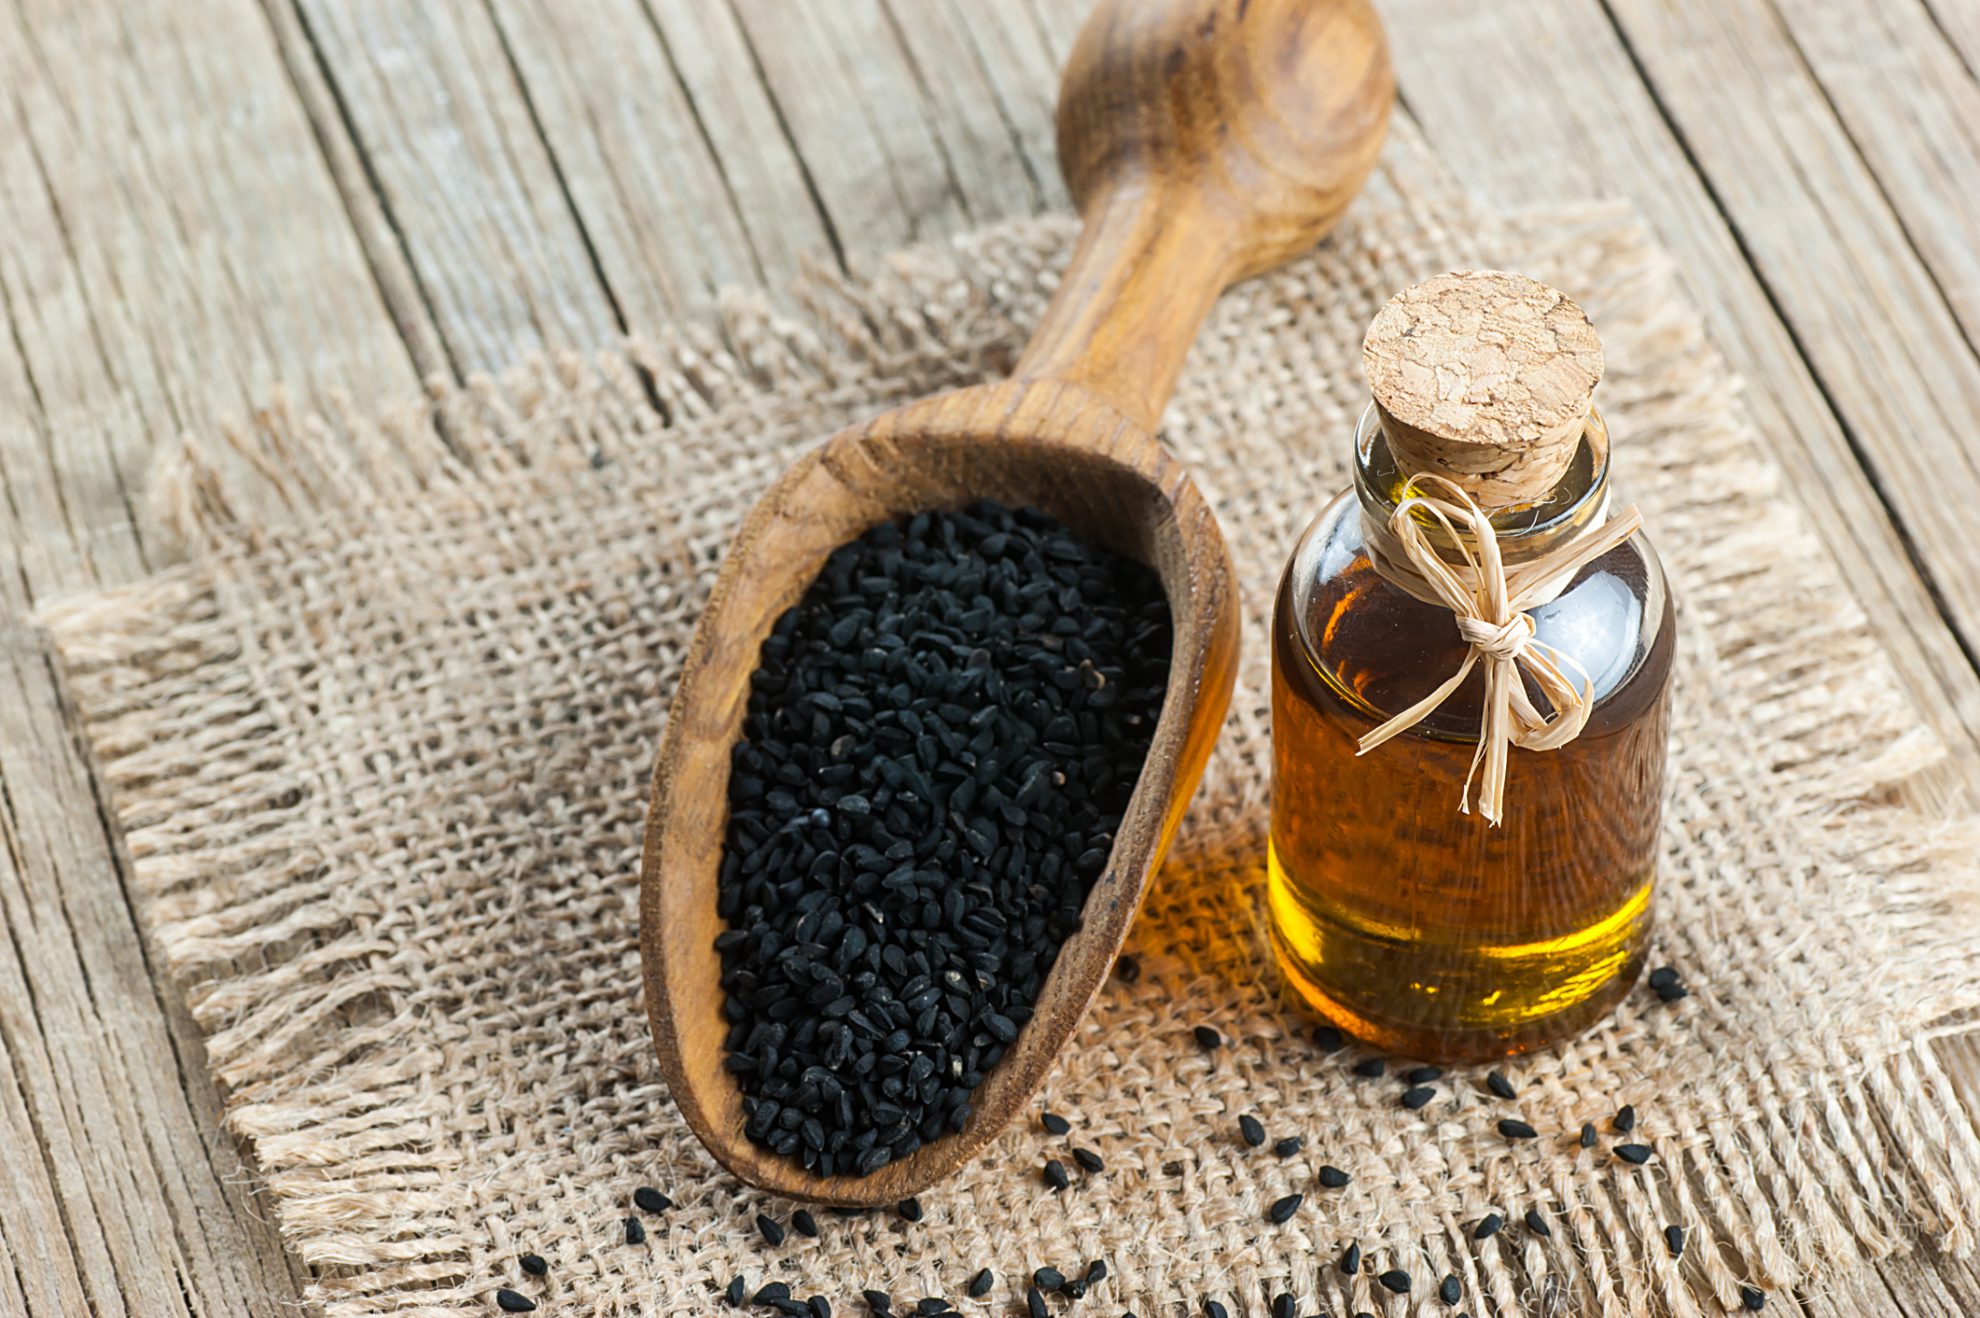 Black cumin seed and diabetes - Easy Health Options®